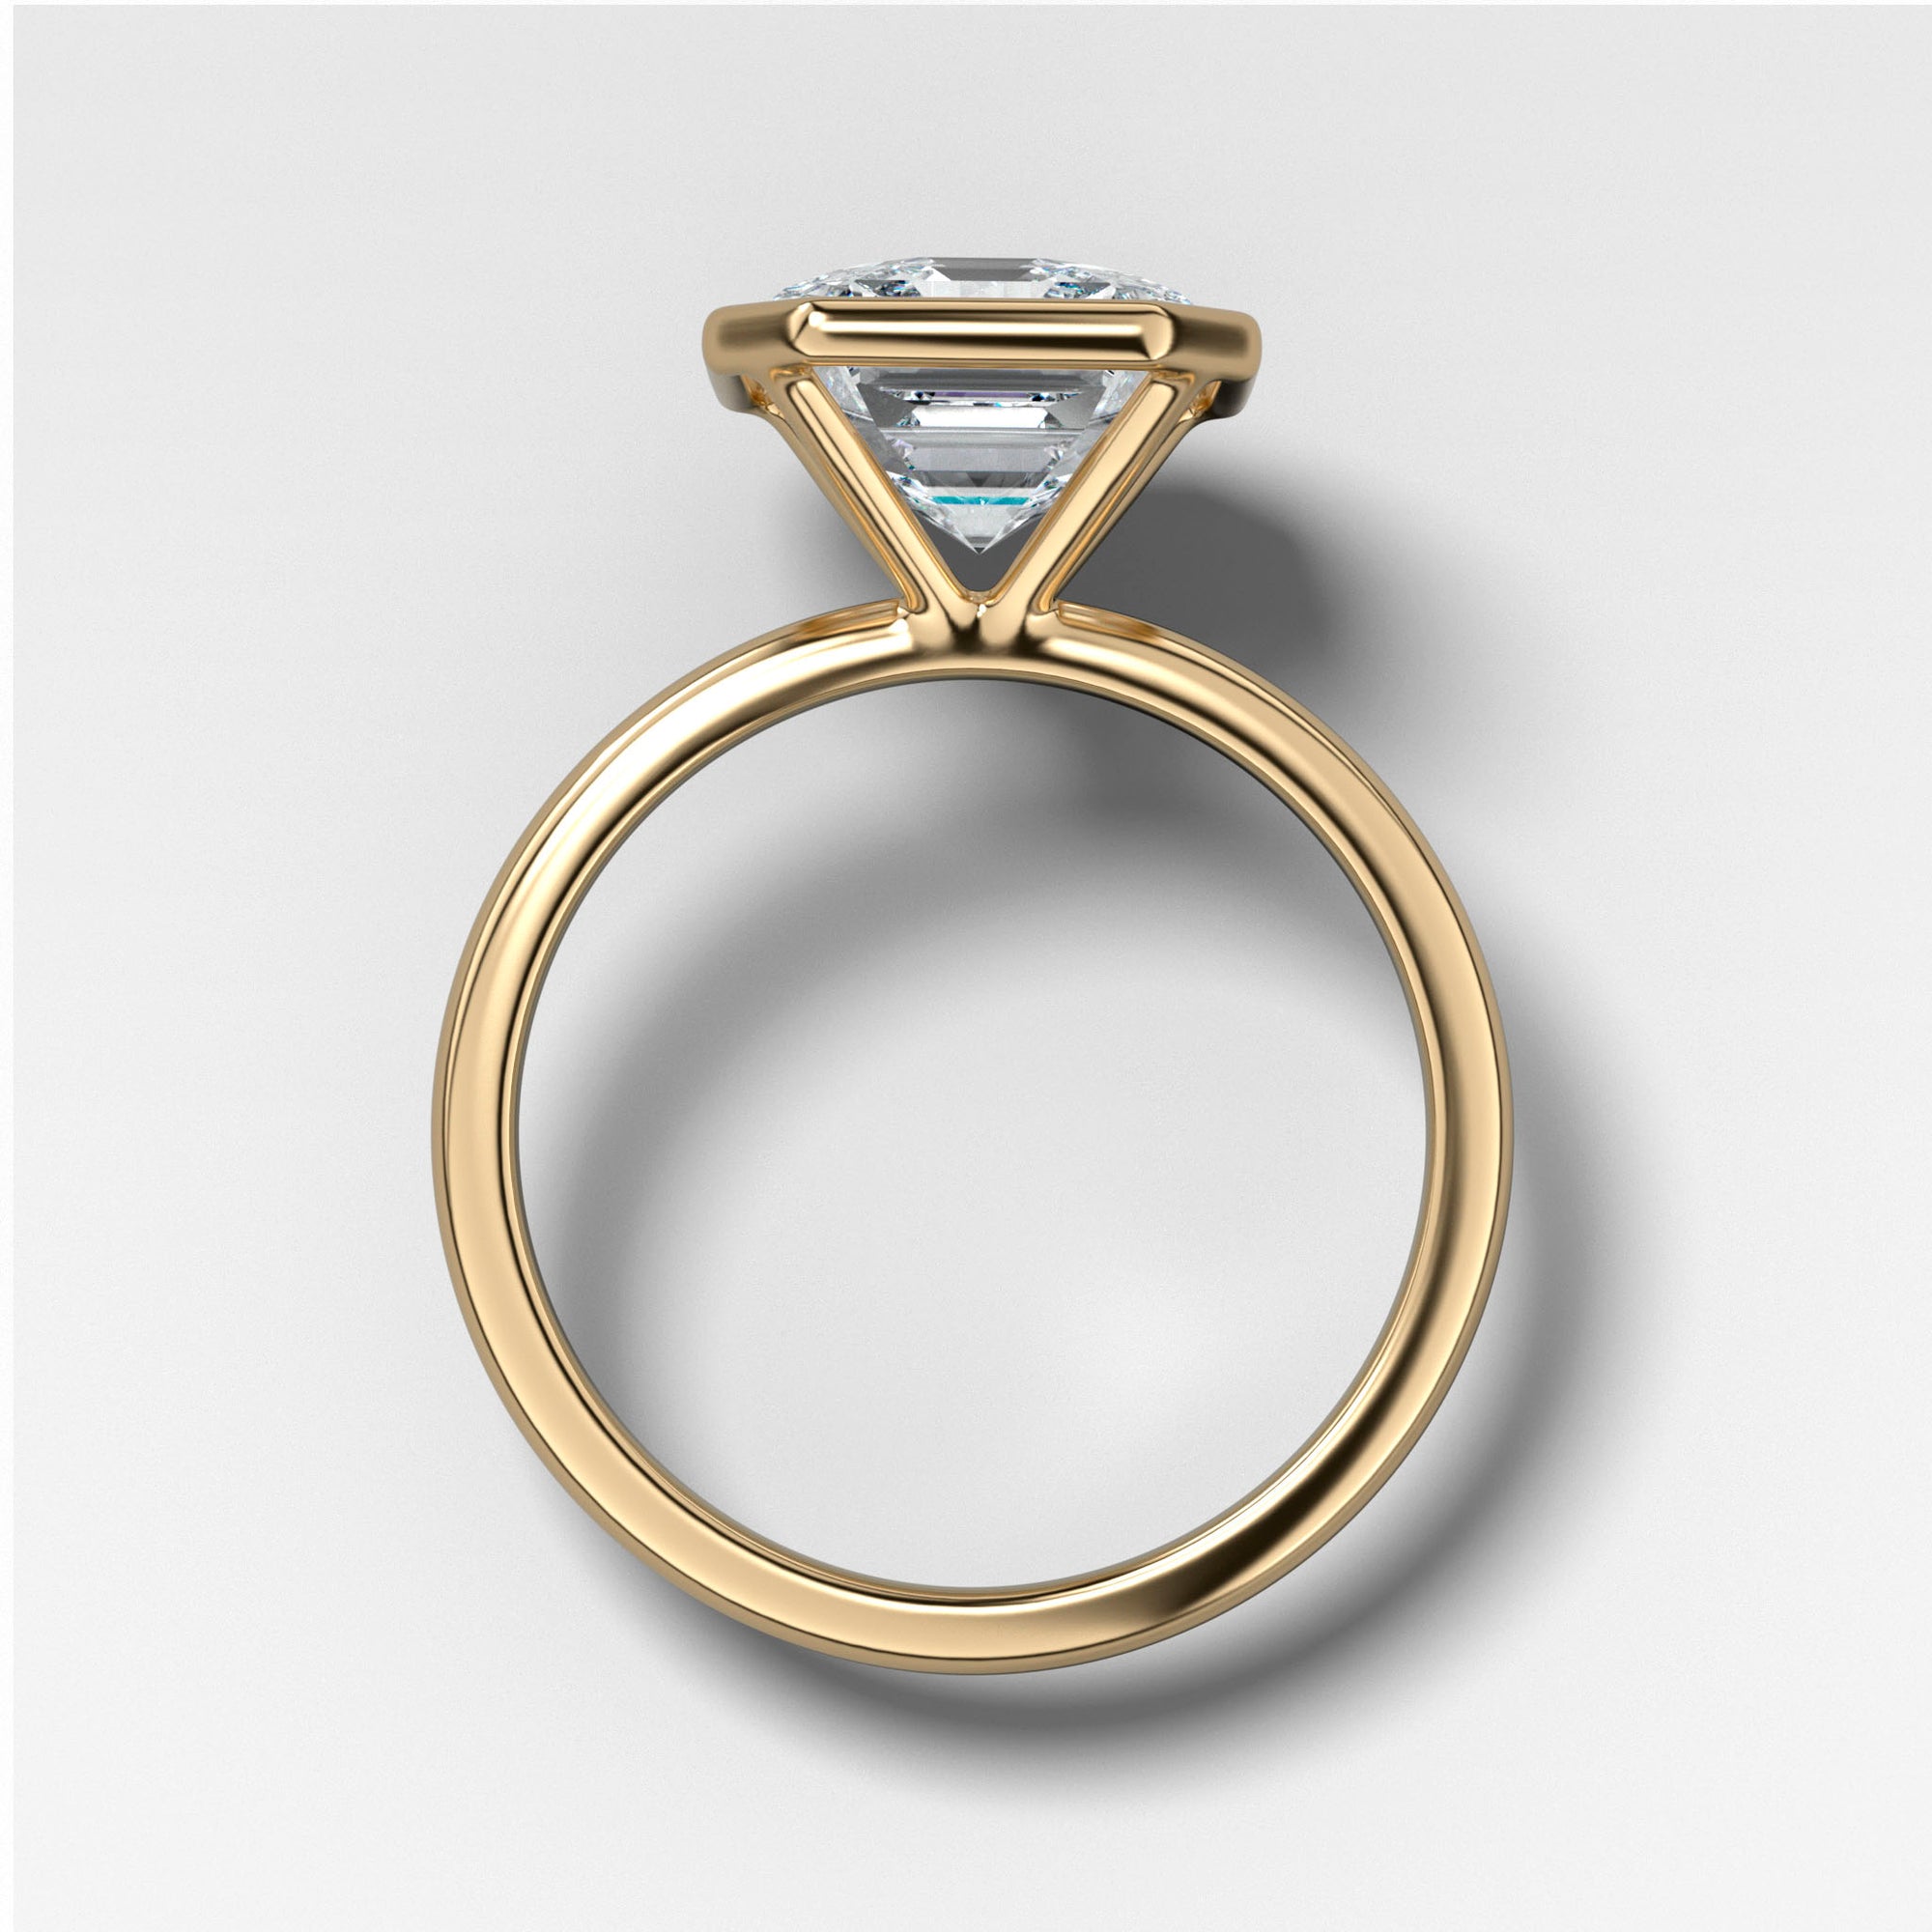 Bezel Penumbra Solitaire With Asscher Cut by Good Stone in Yellow Gold